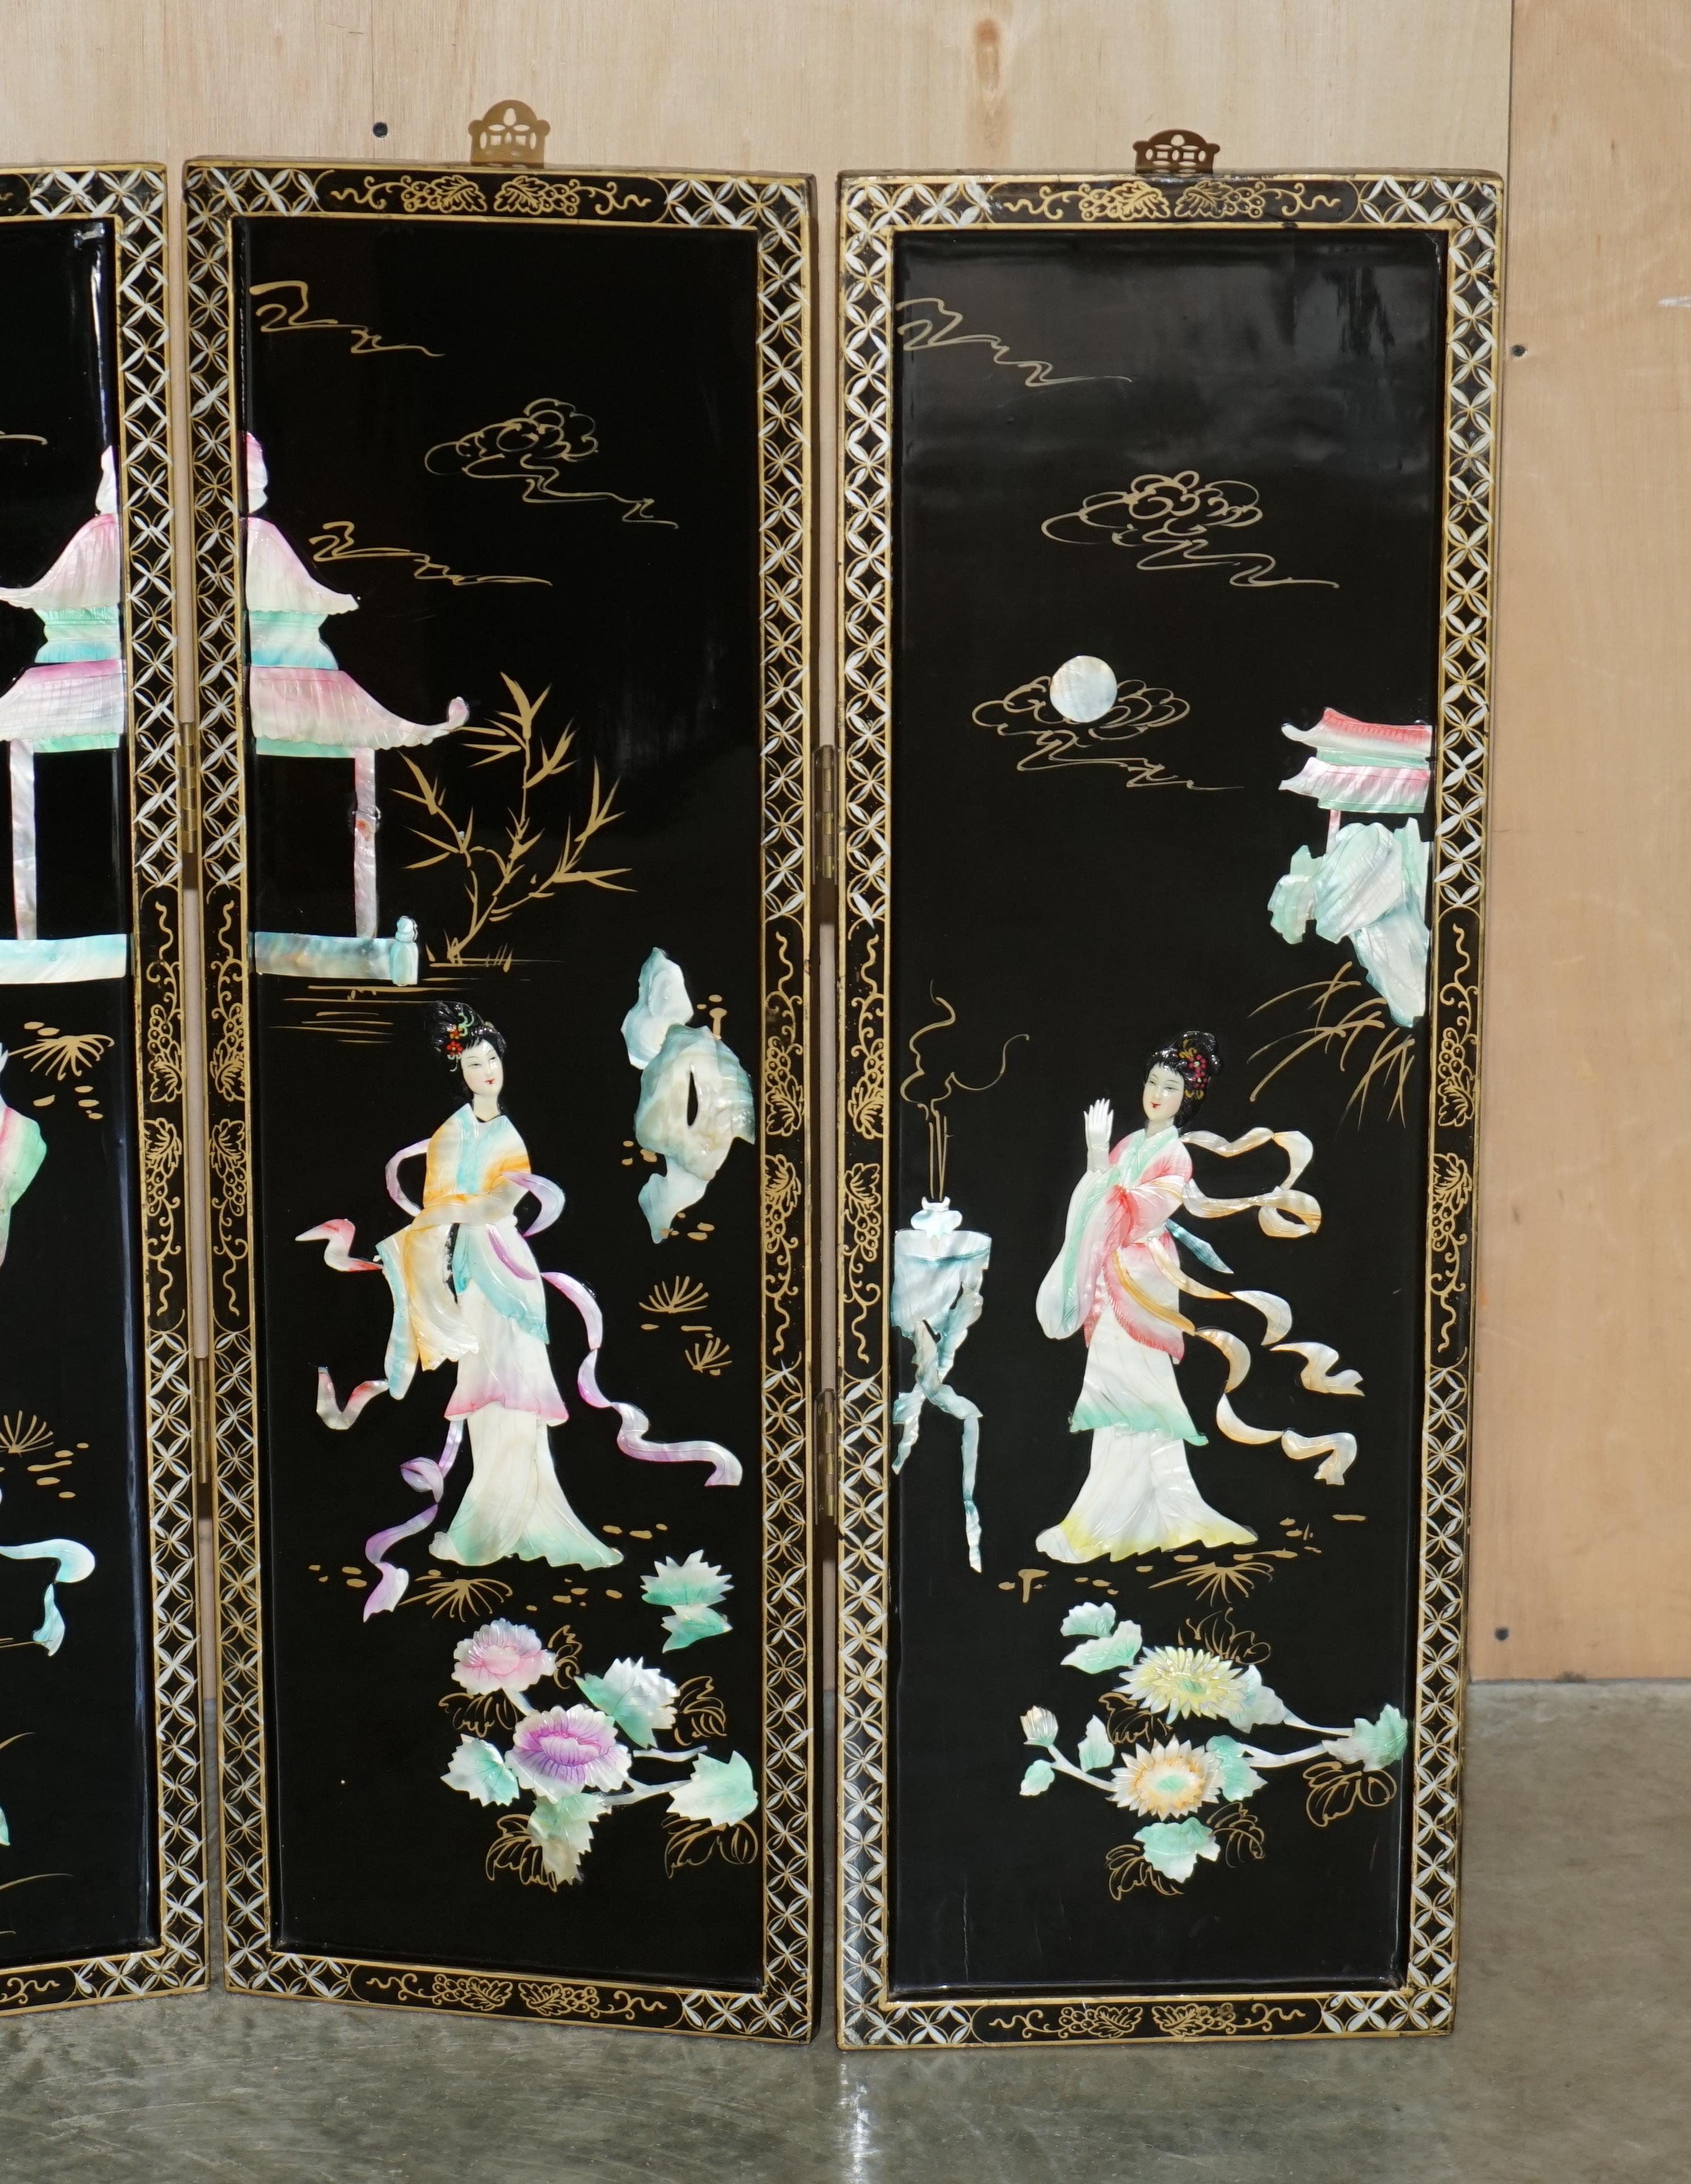 Chinois RARE ET COLLECTIONNÉE CHiNESE EXPORT SOAPSTONE FOLDING SCREEN ROOM DIVIDER en vente